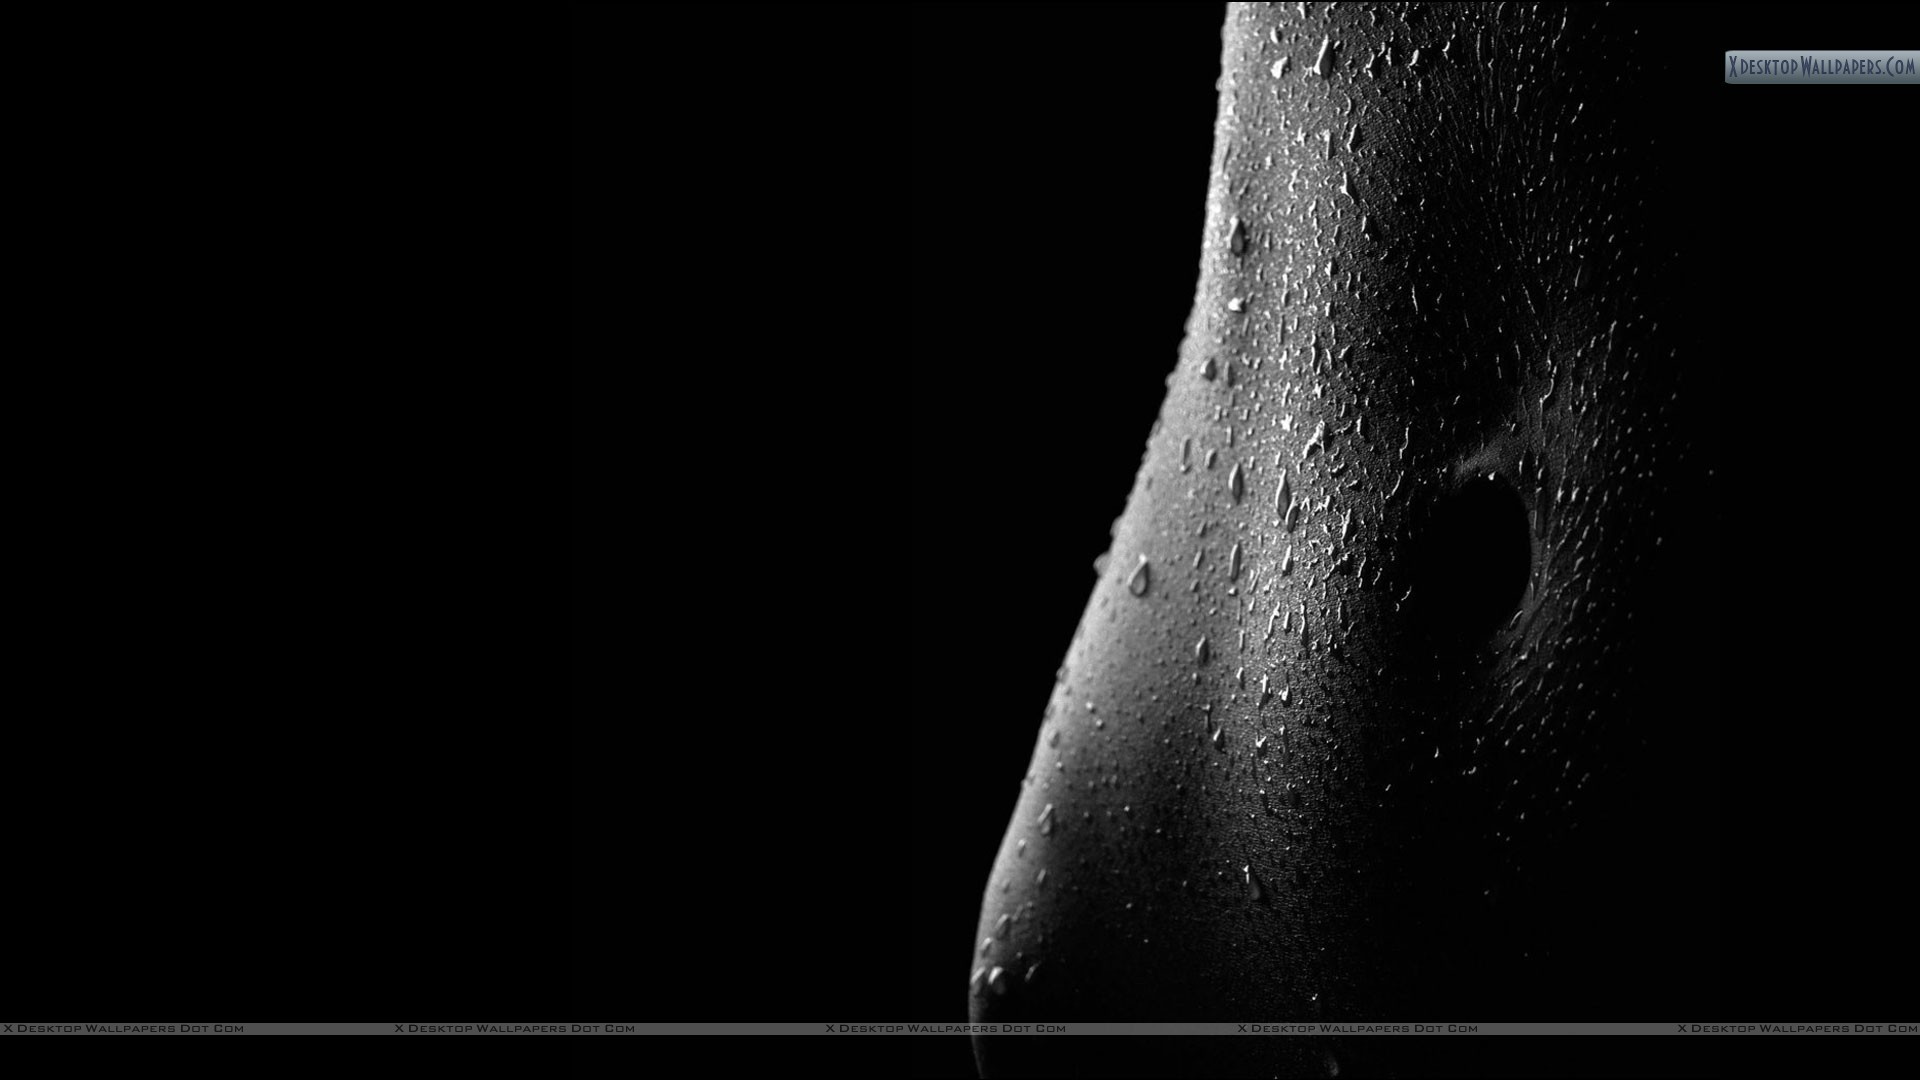 1920x1080 You are viewing wallpaper titled "Skin With Water Drops Black n White" ...